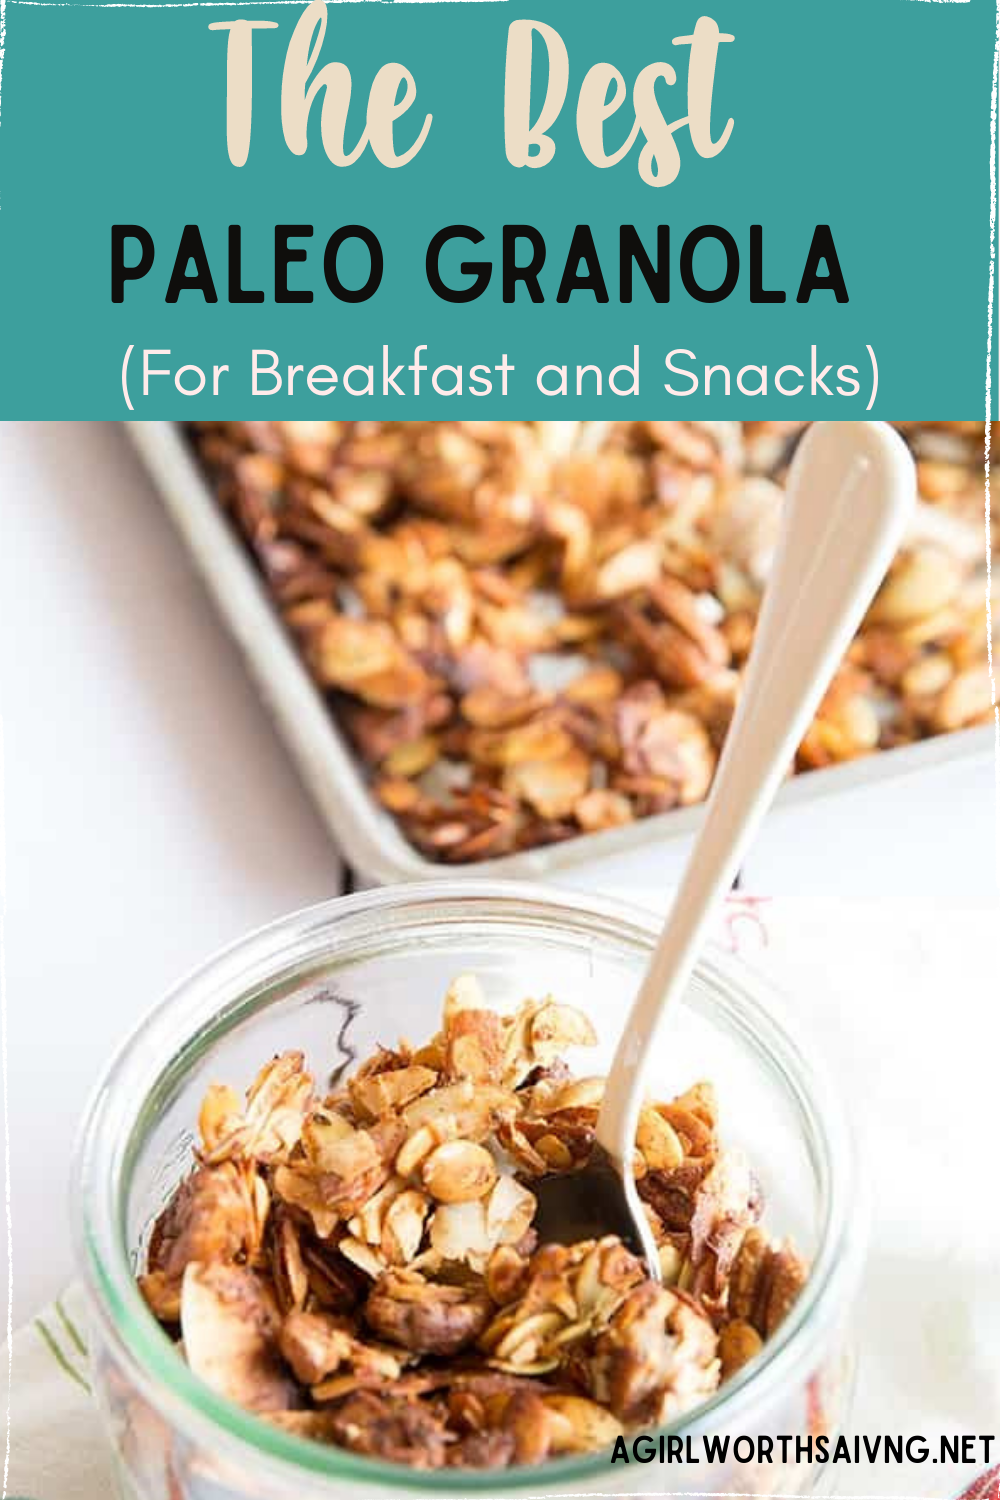 I'm not joking when I say that this Paleo Granola is one of my best homemade granola recipes, ever. The pumpkin seeds combined with the slivered almonds and unsweetened coconut flakes create a truly amazing texture that you're going to love.